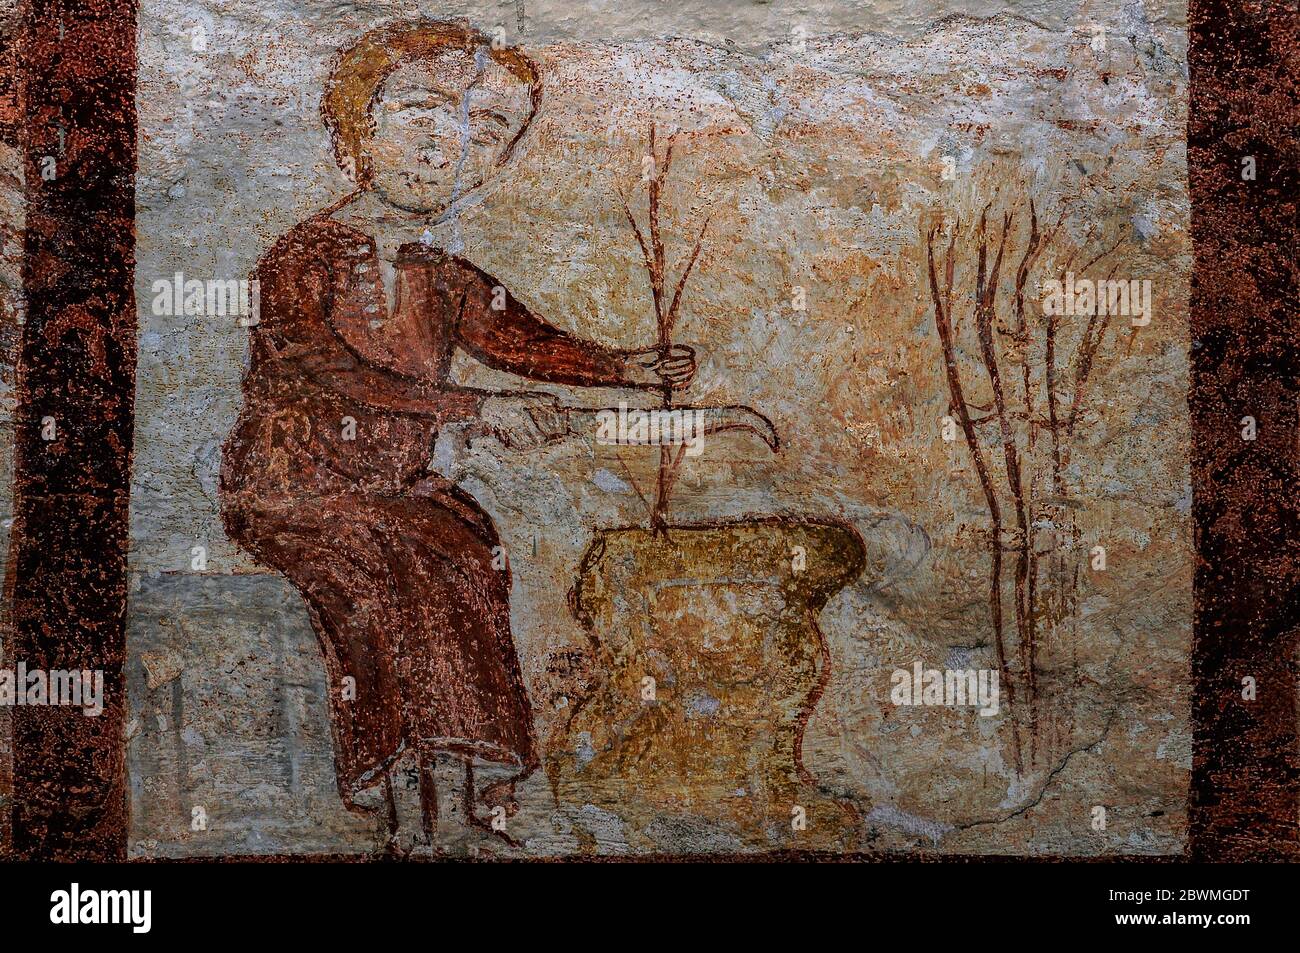 Pruning saplings by hand with a billhook or knife.  Detail of medieval Labours of the Months fresco cycle, painted in ochre in primitive or rustic style. In the cloister attached to the Chiesa di San Nicola (Church of St Nicholas) at the Abbazia di Piona (Piona Abbey), beside Lake Como at Colico, Lombardy, Italy. Stock Photo